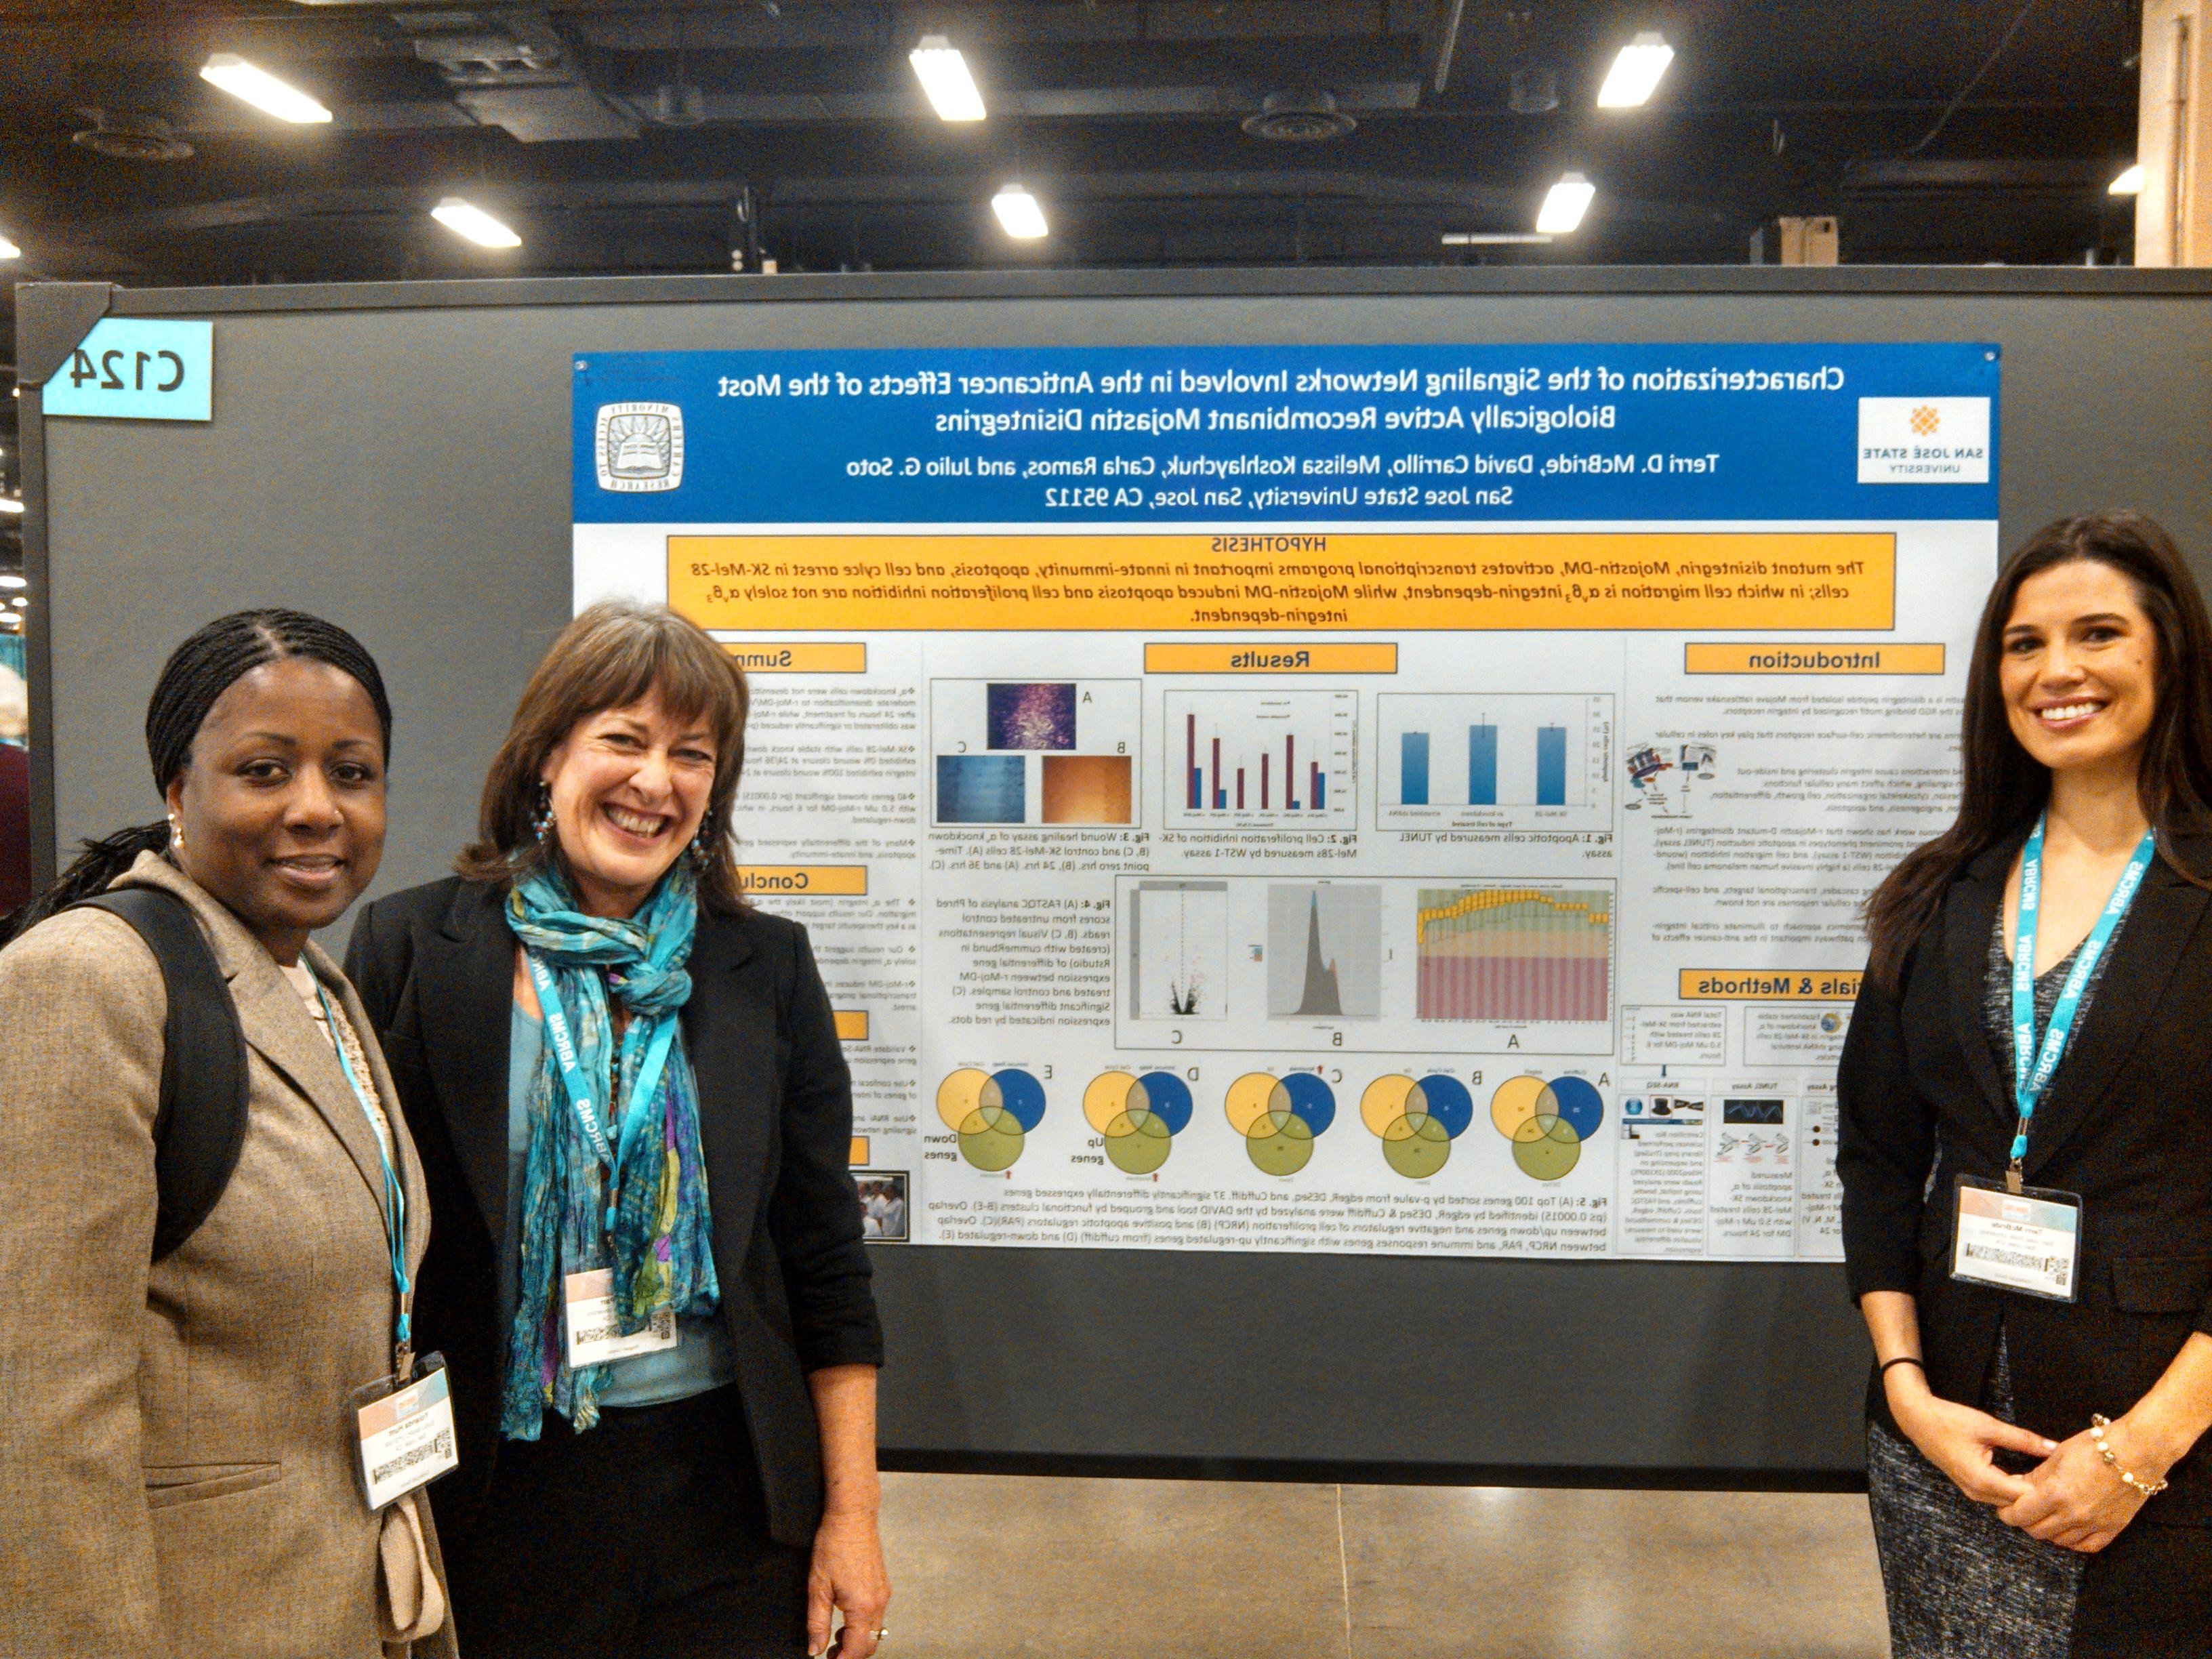 Students in front of a poster at the ABRCMS Conference